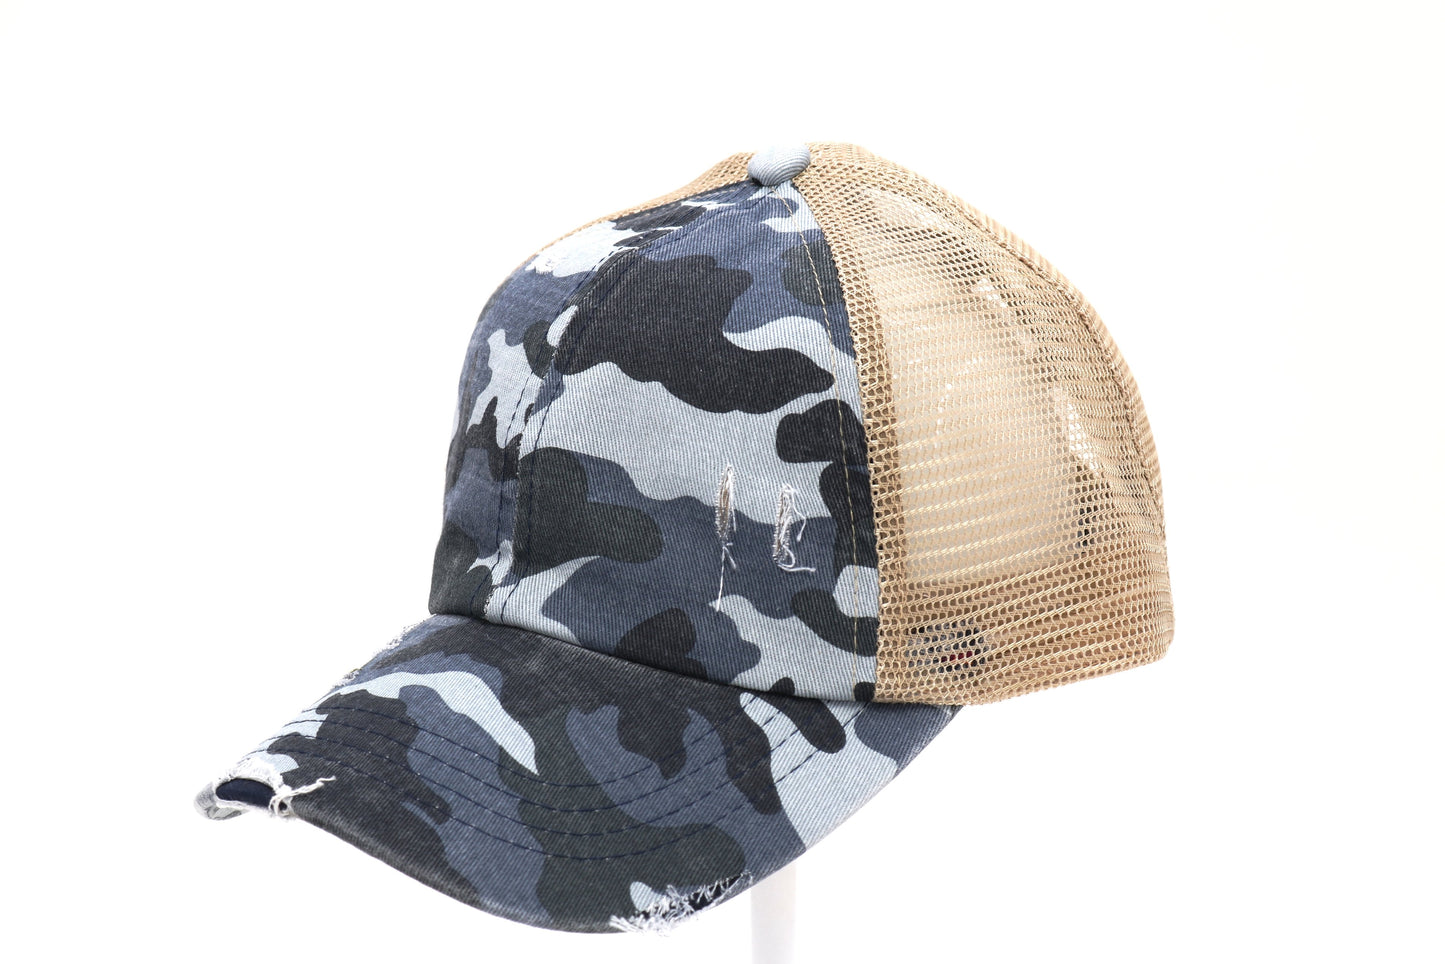 Distressed Camouflage Criss Cross High Pony Ball Cap